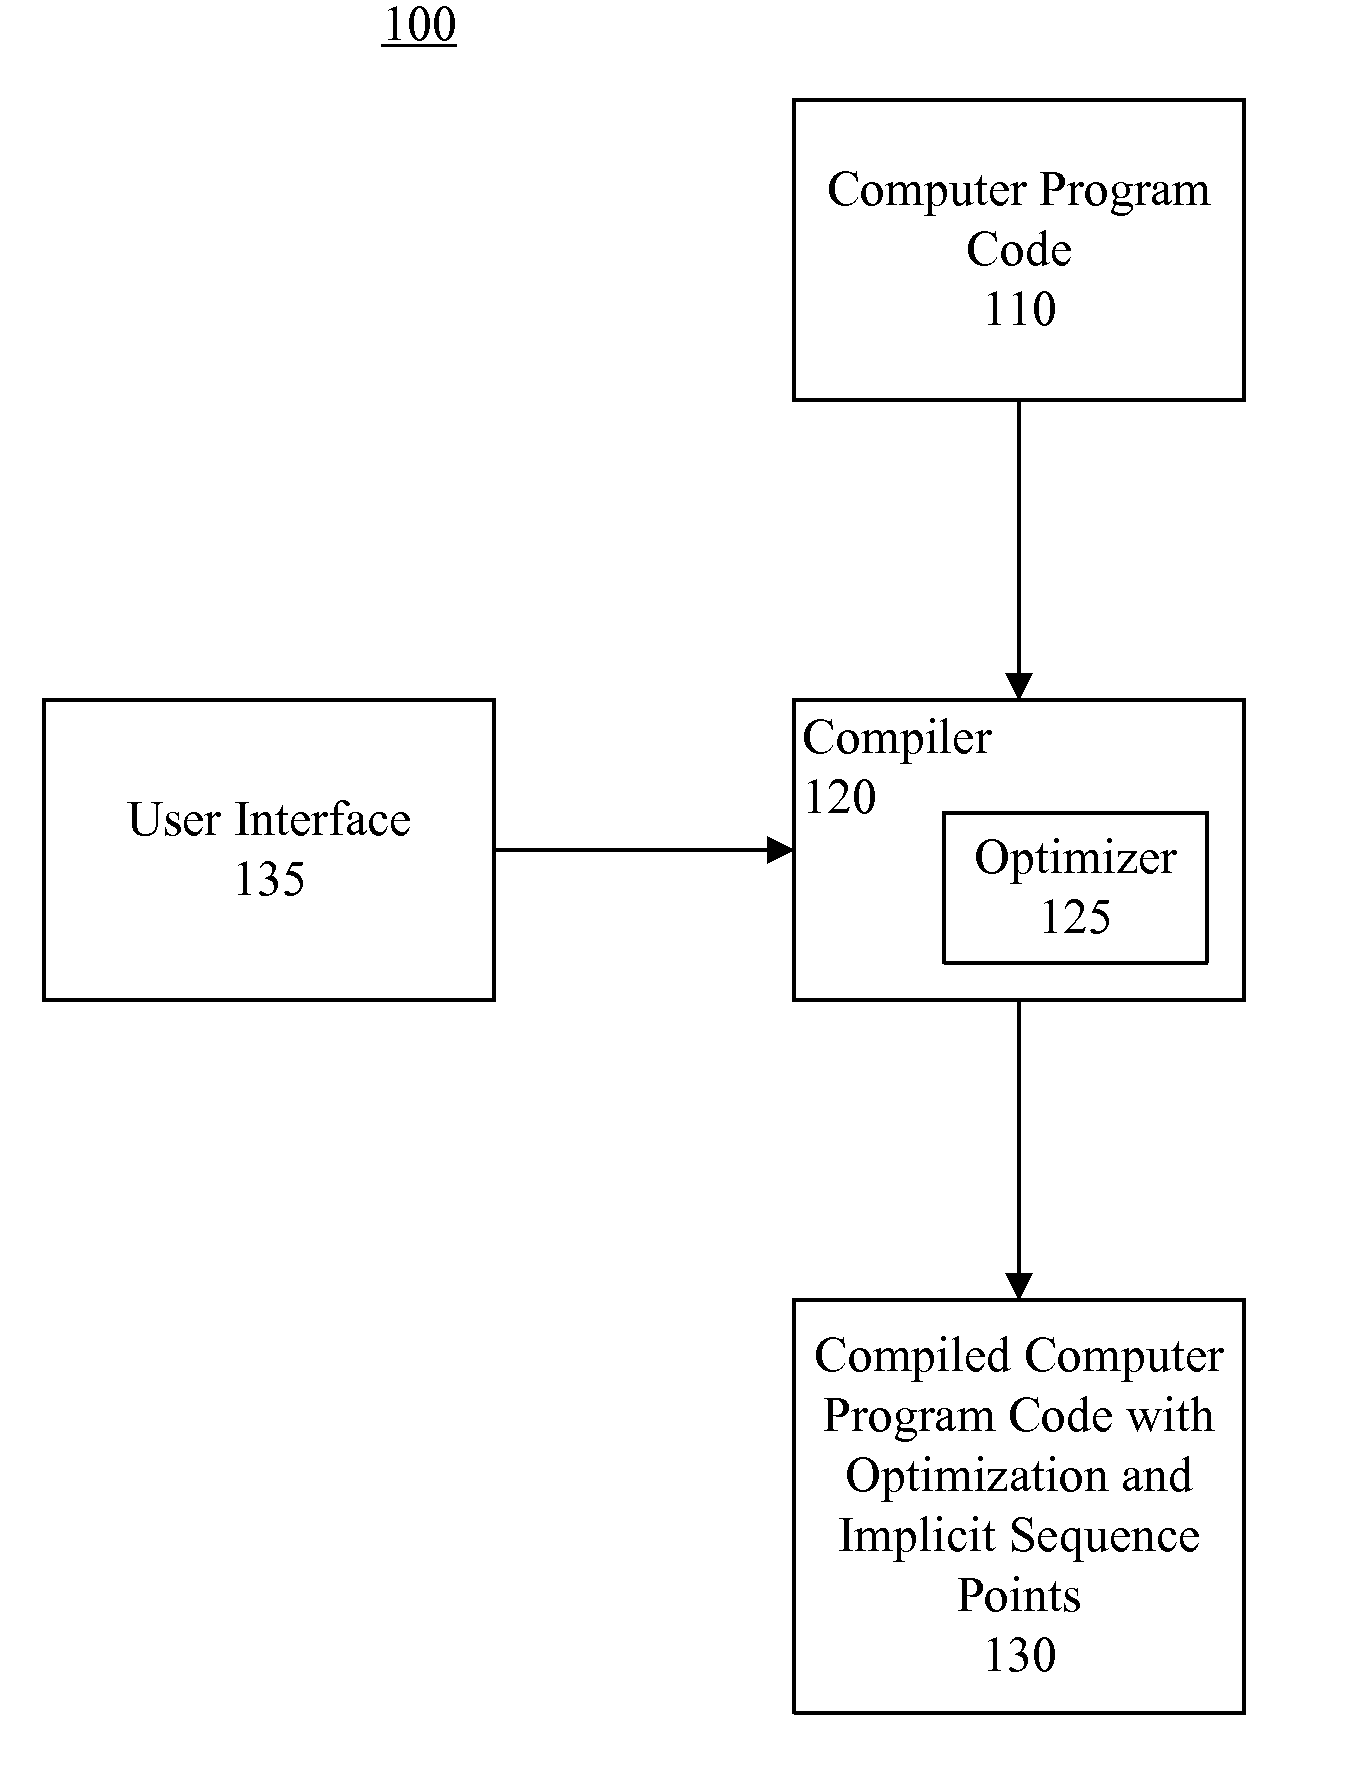 Inserting implicit sequence points into computer program code to support debug operations